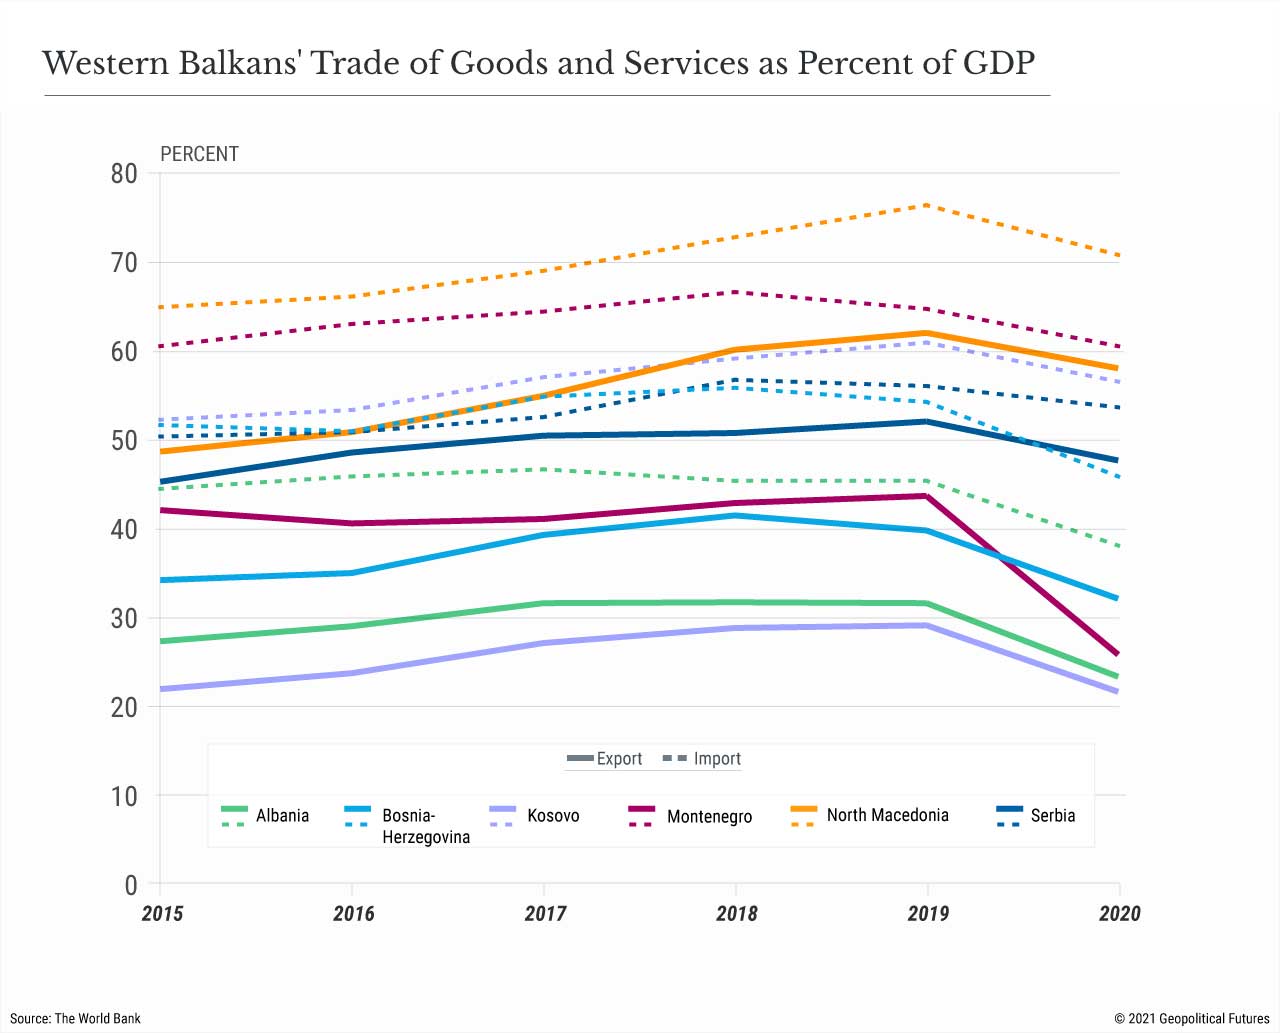 Balkan Trade of Goods and Services as Percent of GDP